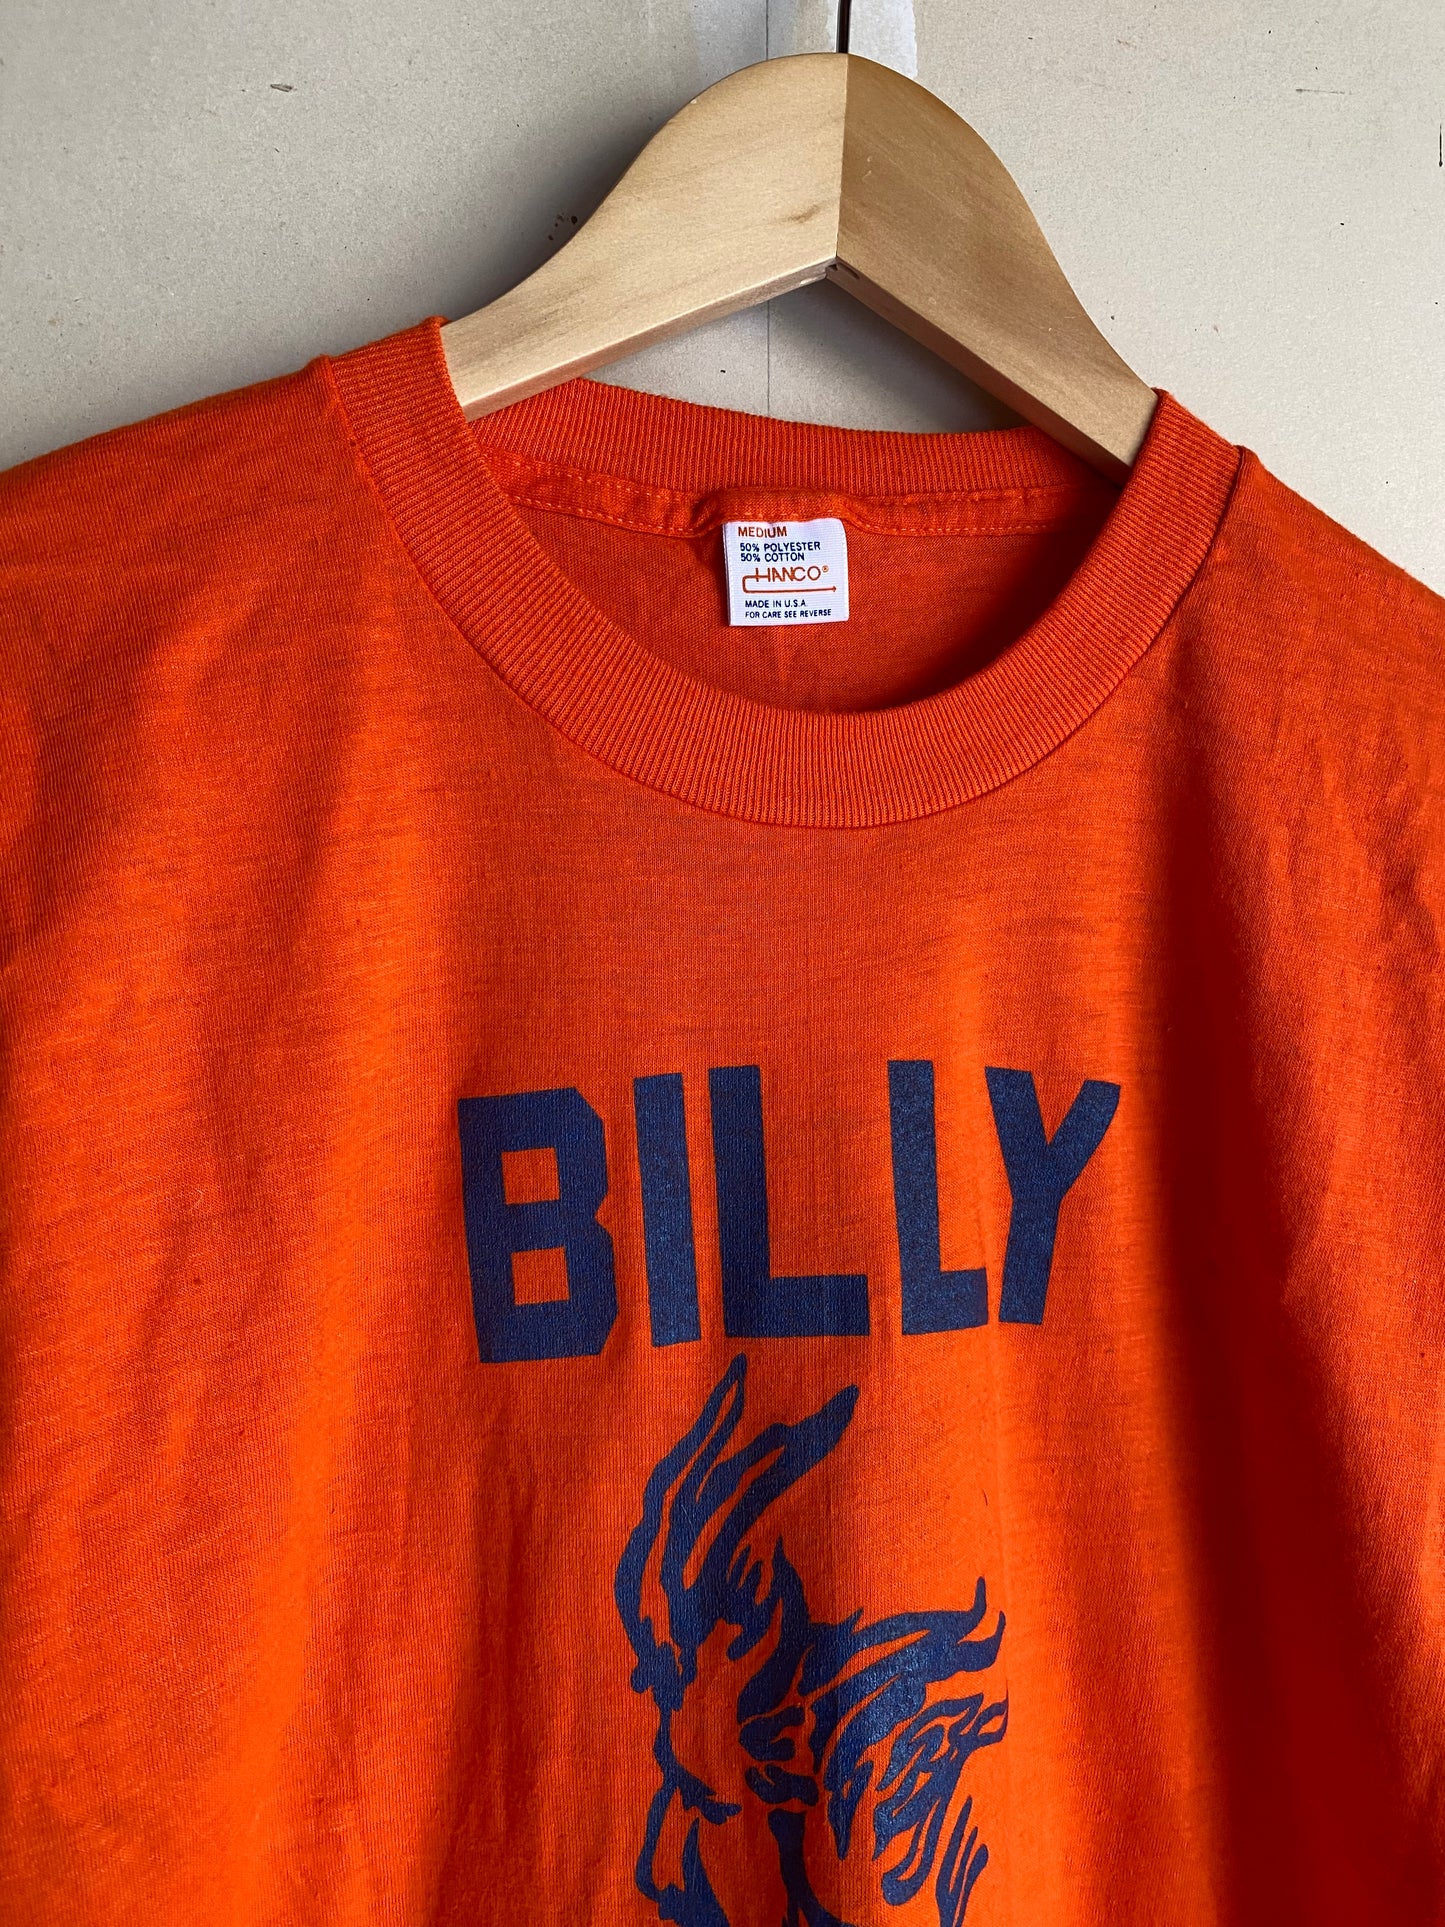 1970s "Billy Goat" Tee | M